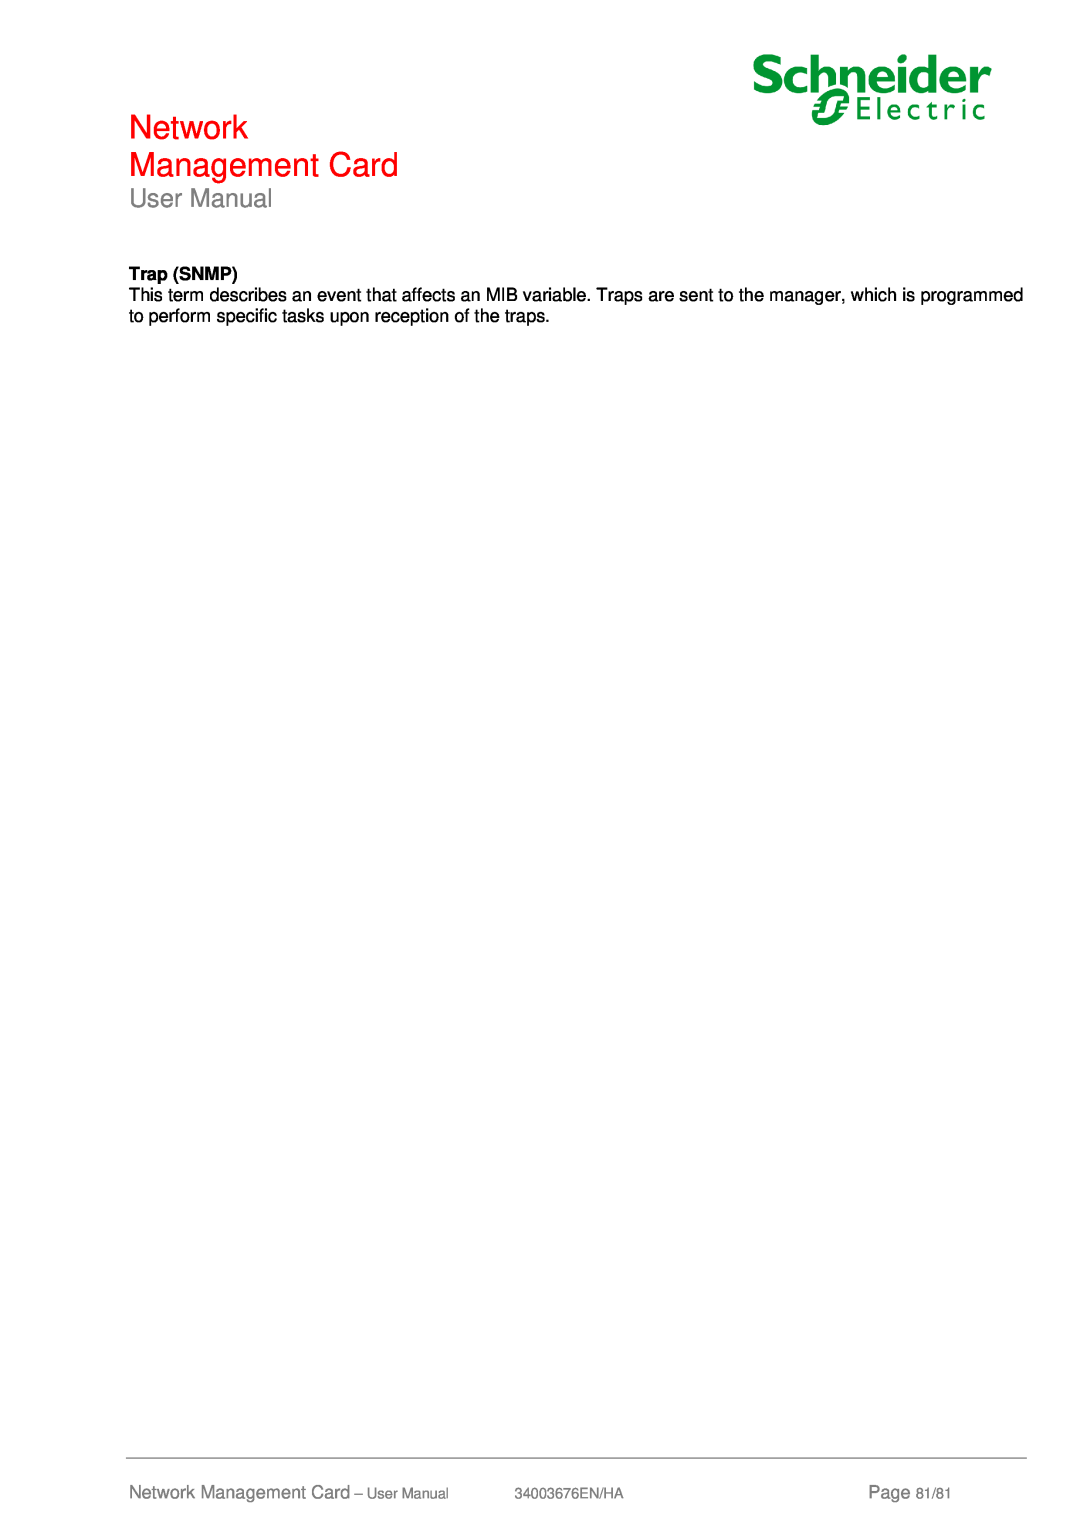 Schneider Electric 66074, 66846 Trap SNMP, Network Management Card - User Manual, Page 81/81, 34003676EN/HA 